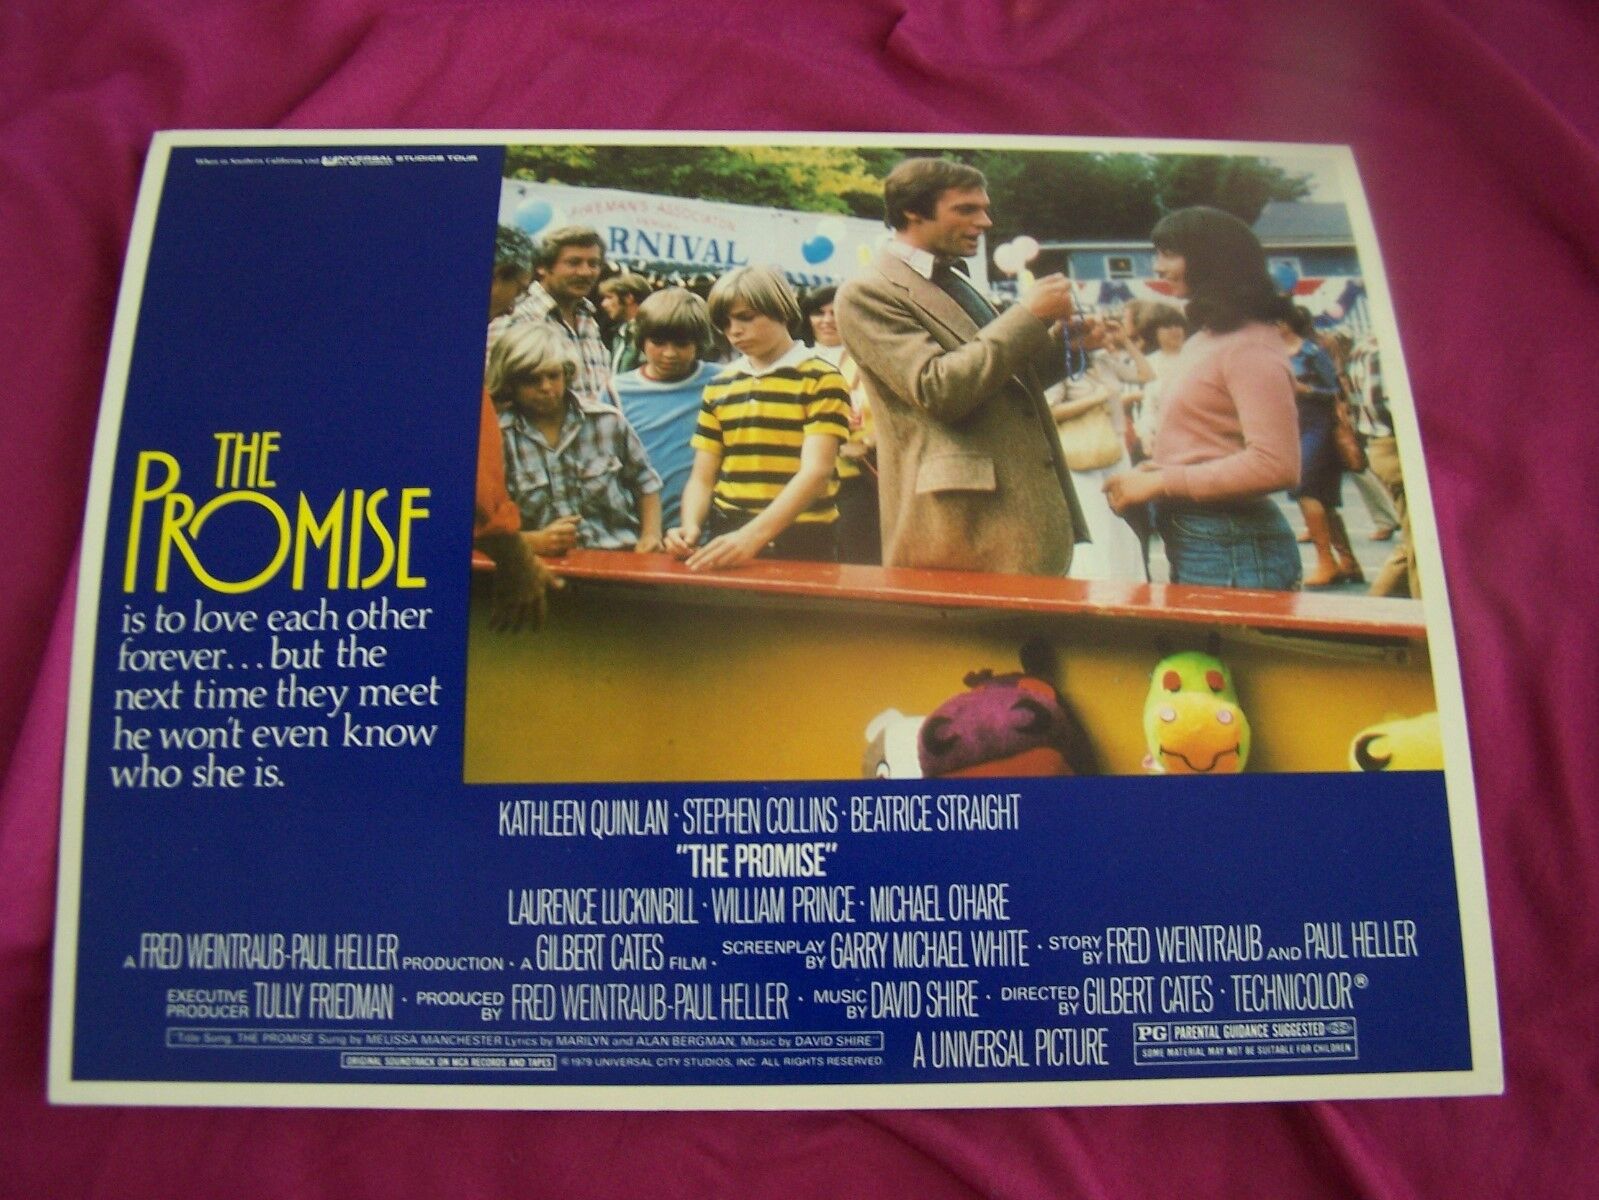 The Promise -1979 Movie-lobby Card Kathleen Quinlen - Stephen Collins Drama